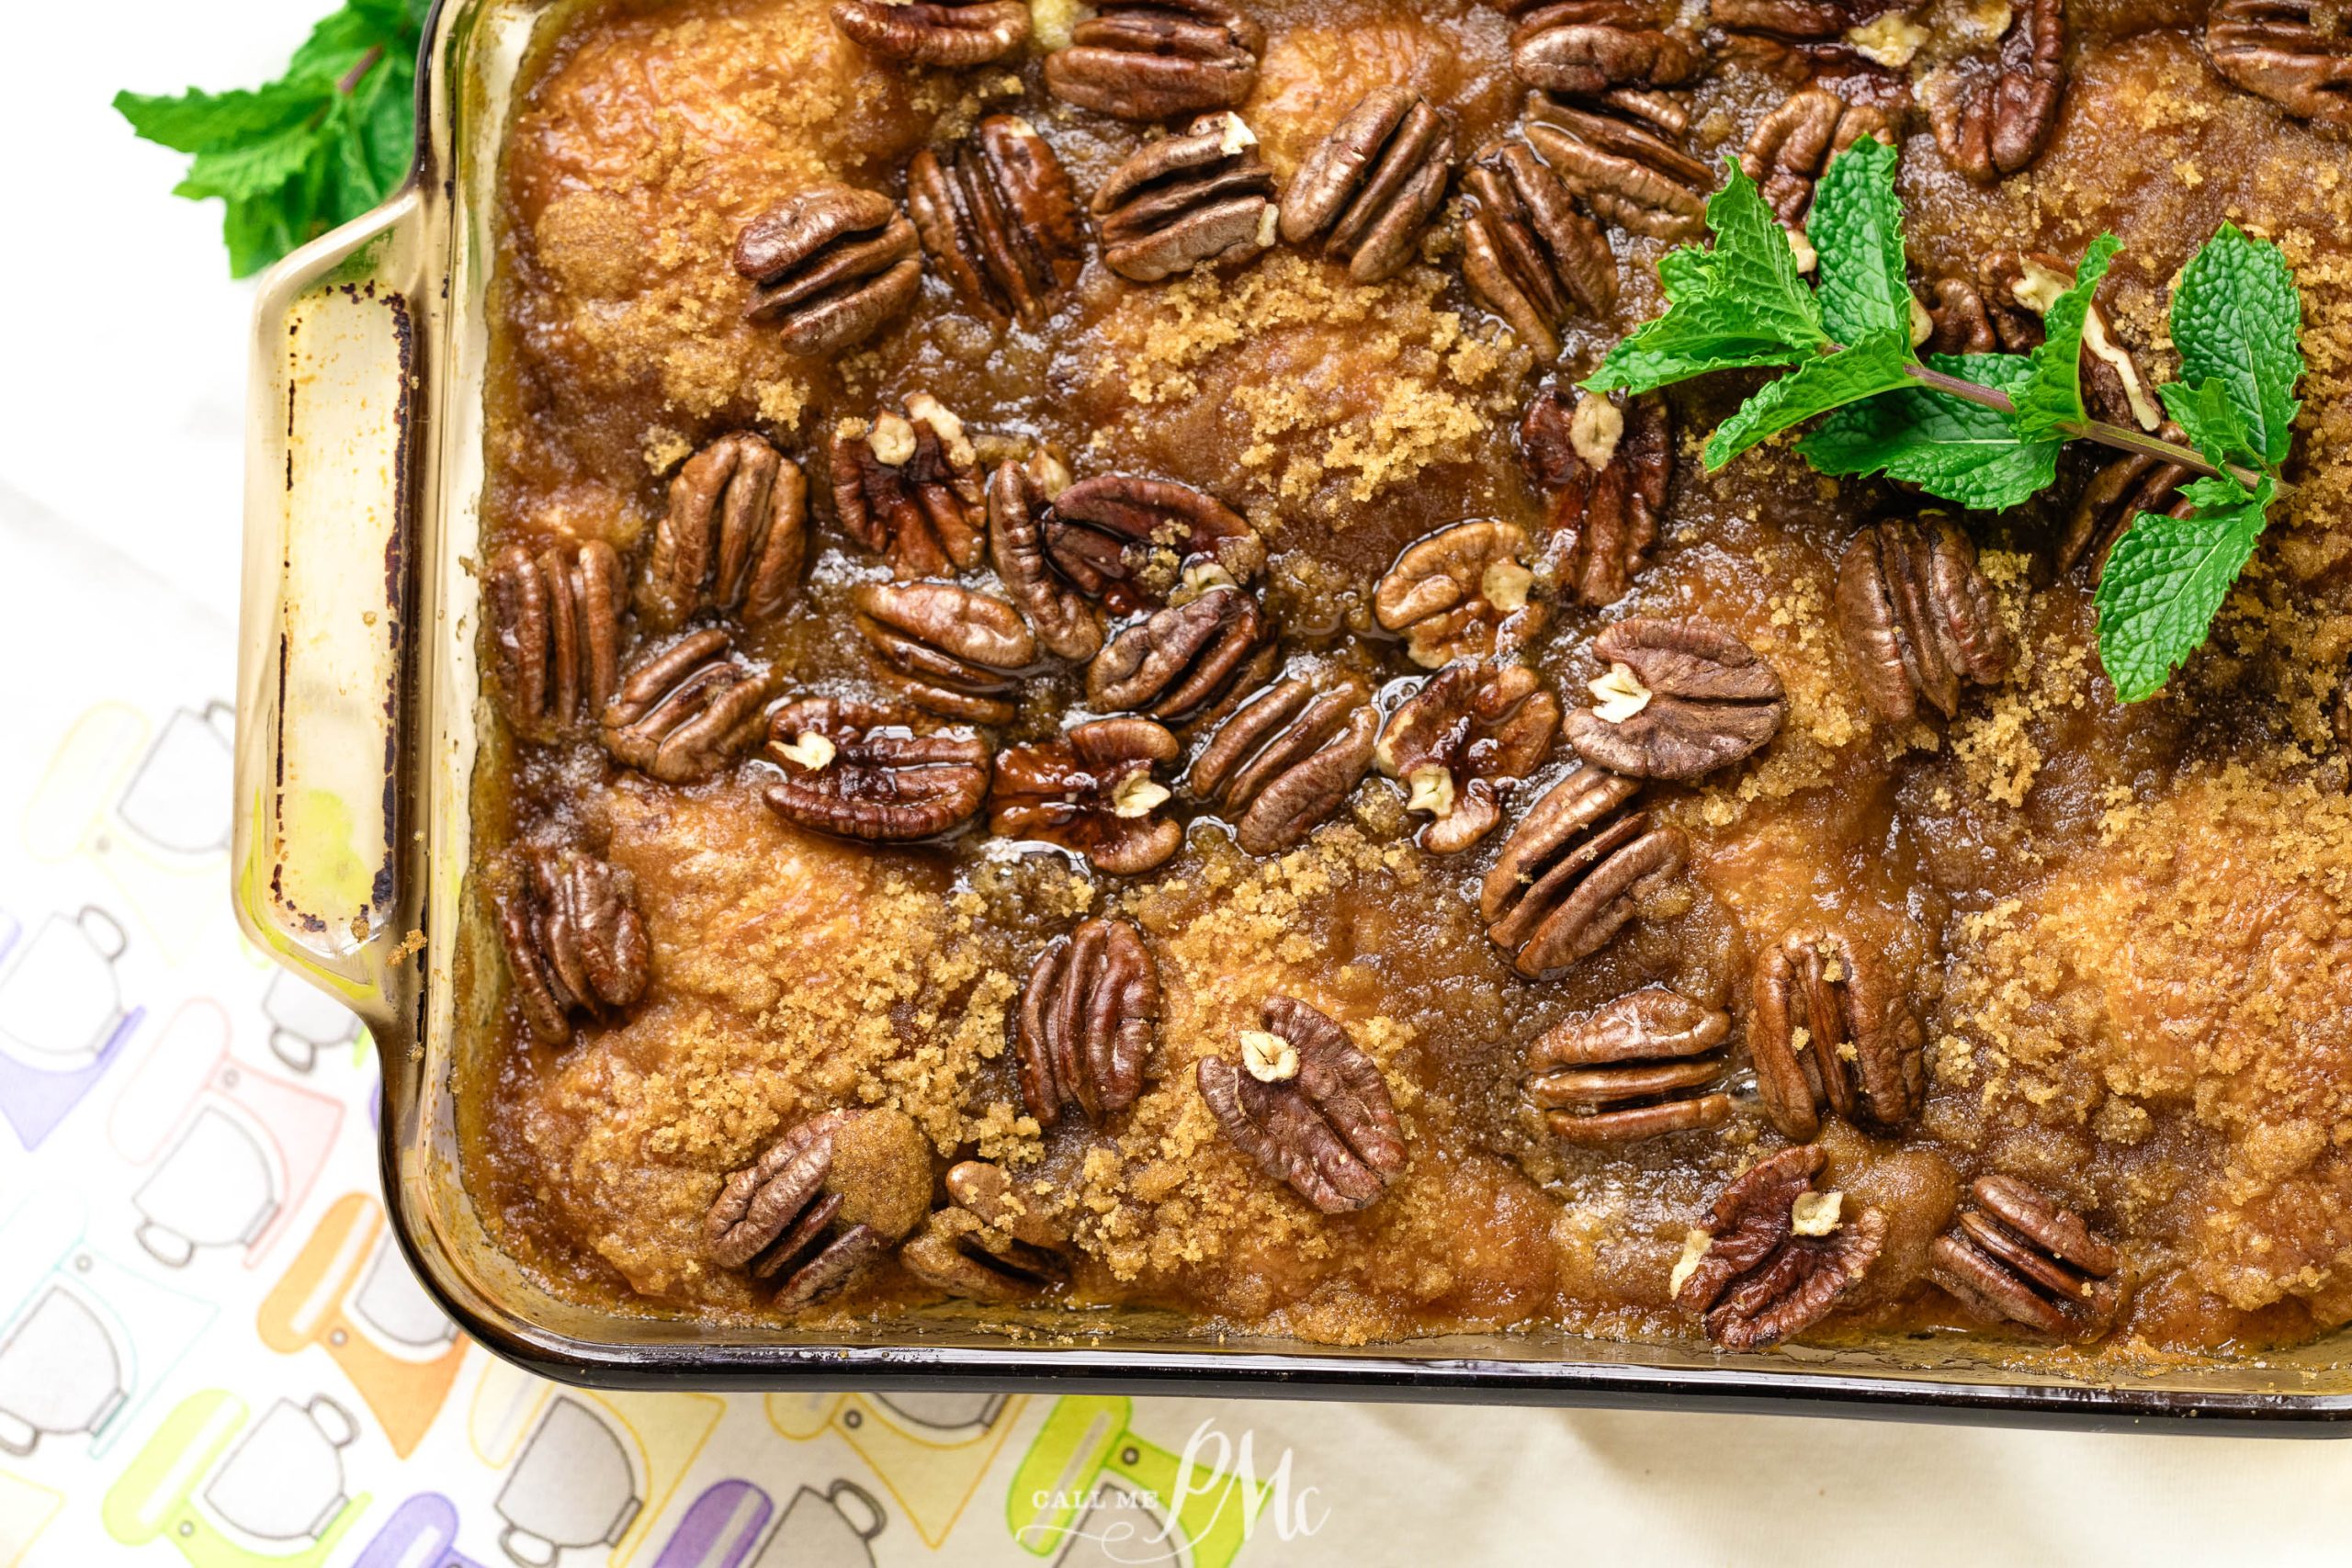 Bread pudding with pecans and mint.